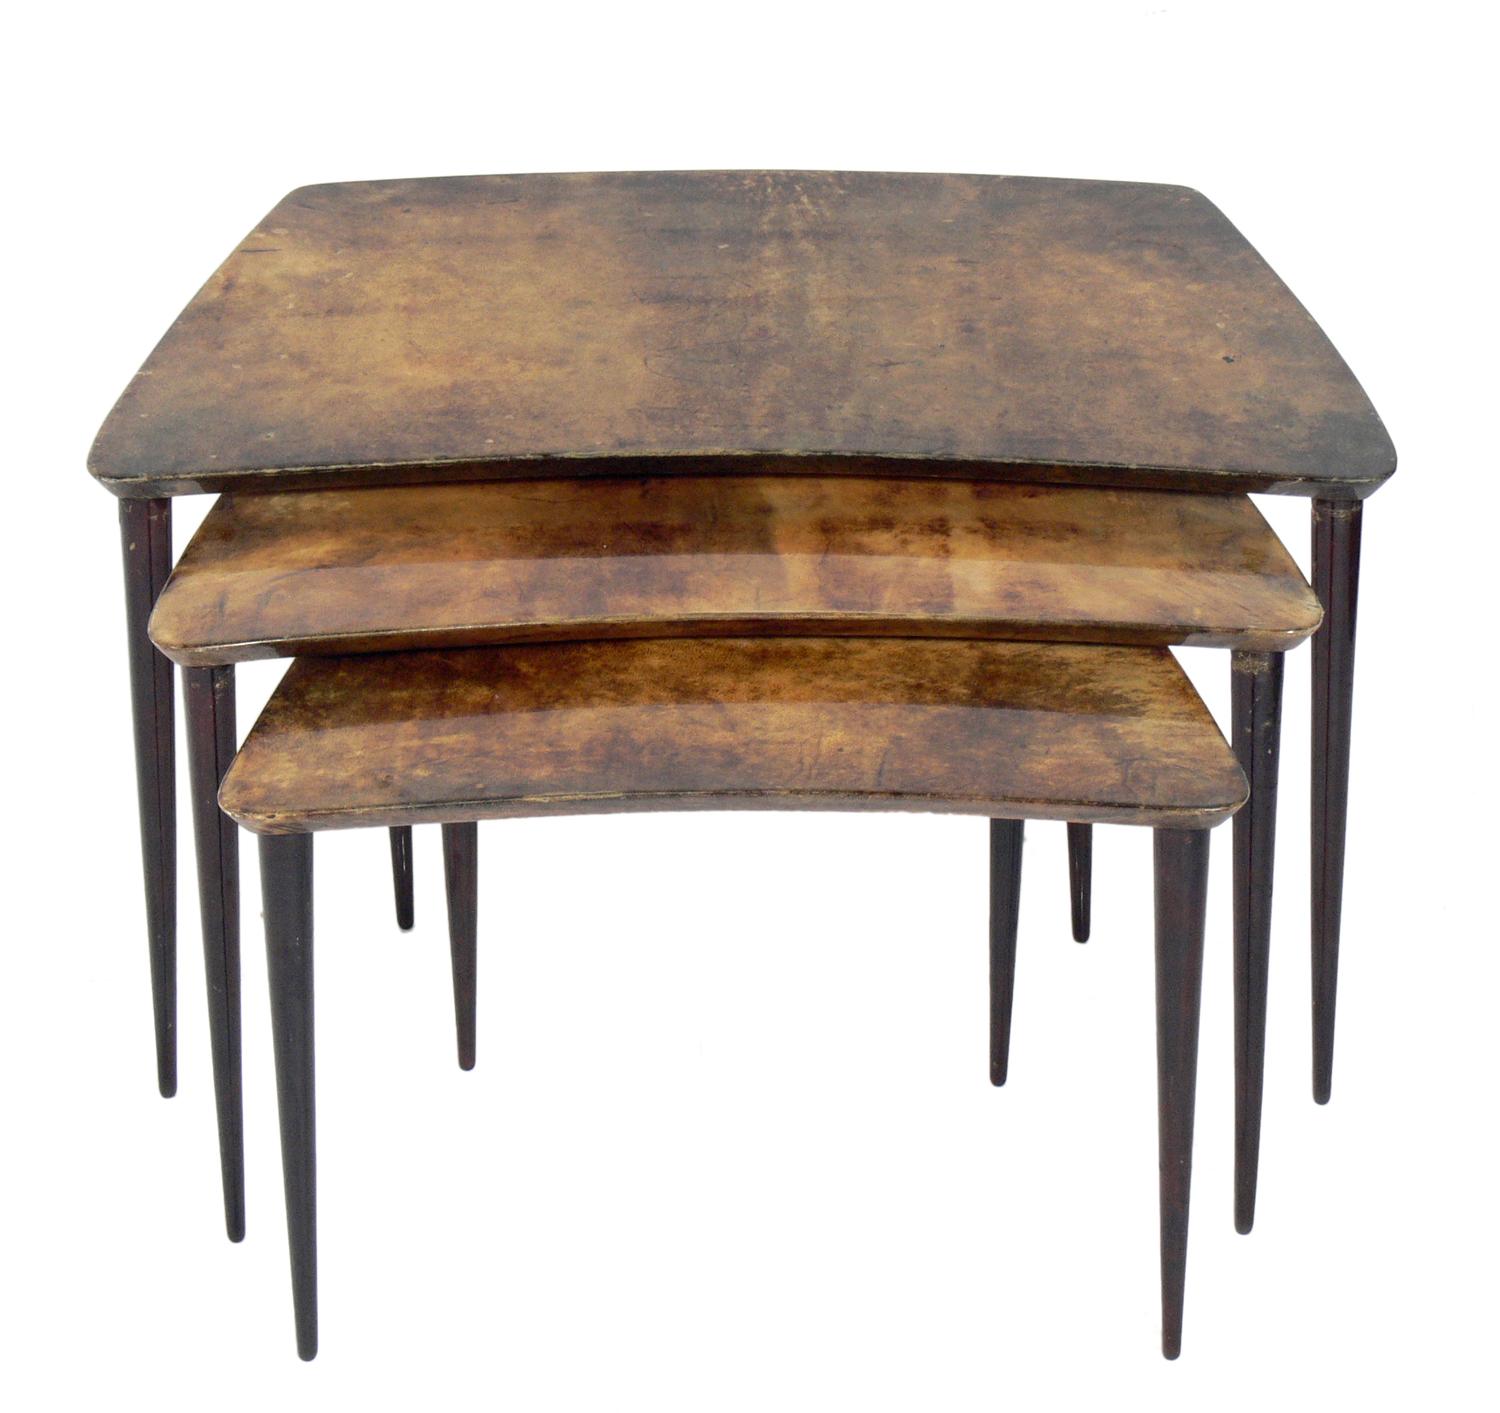 Set of Italian goatskin or parchment nesting tables, designed by Aldo Tura, Italy, circa 1950s. The large table measures 16.25